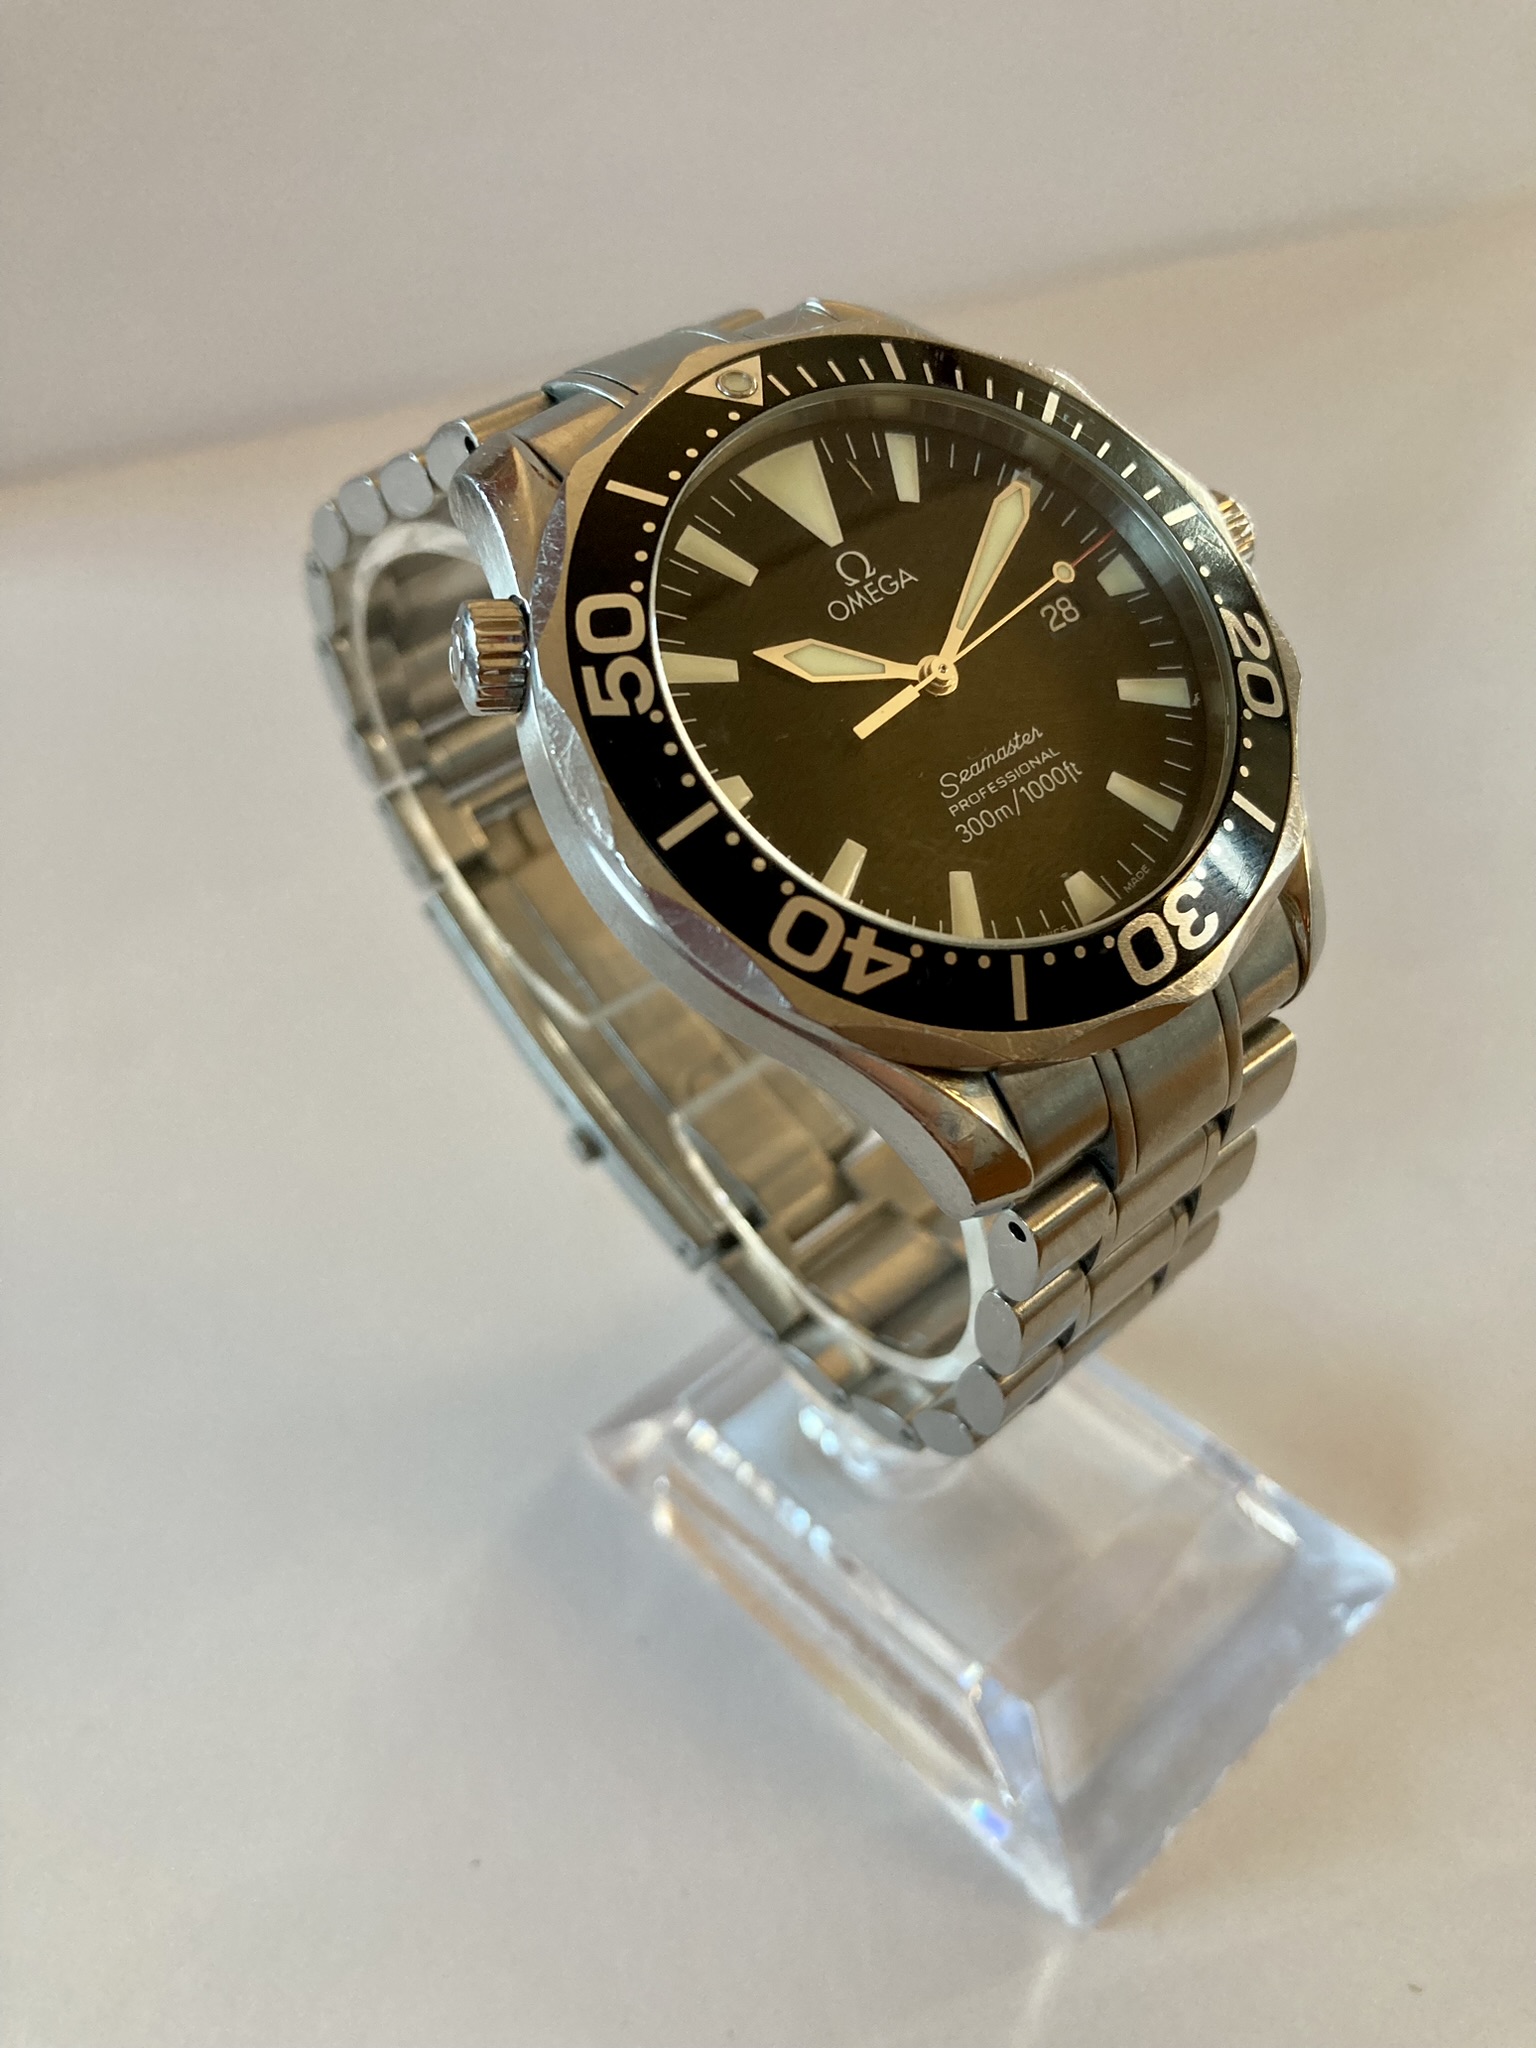 Sell Omega Seamaster watch in Algete